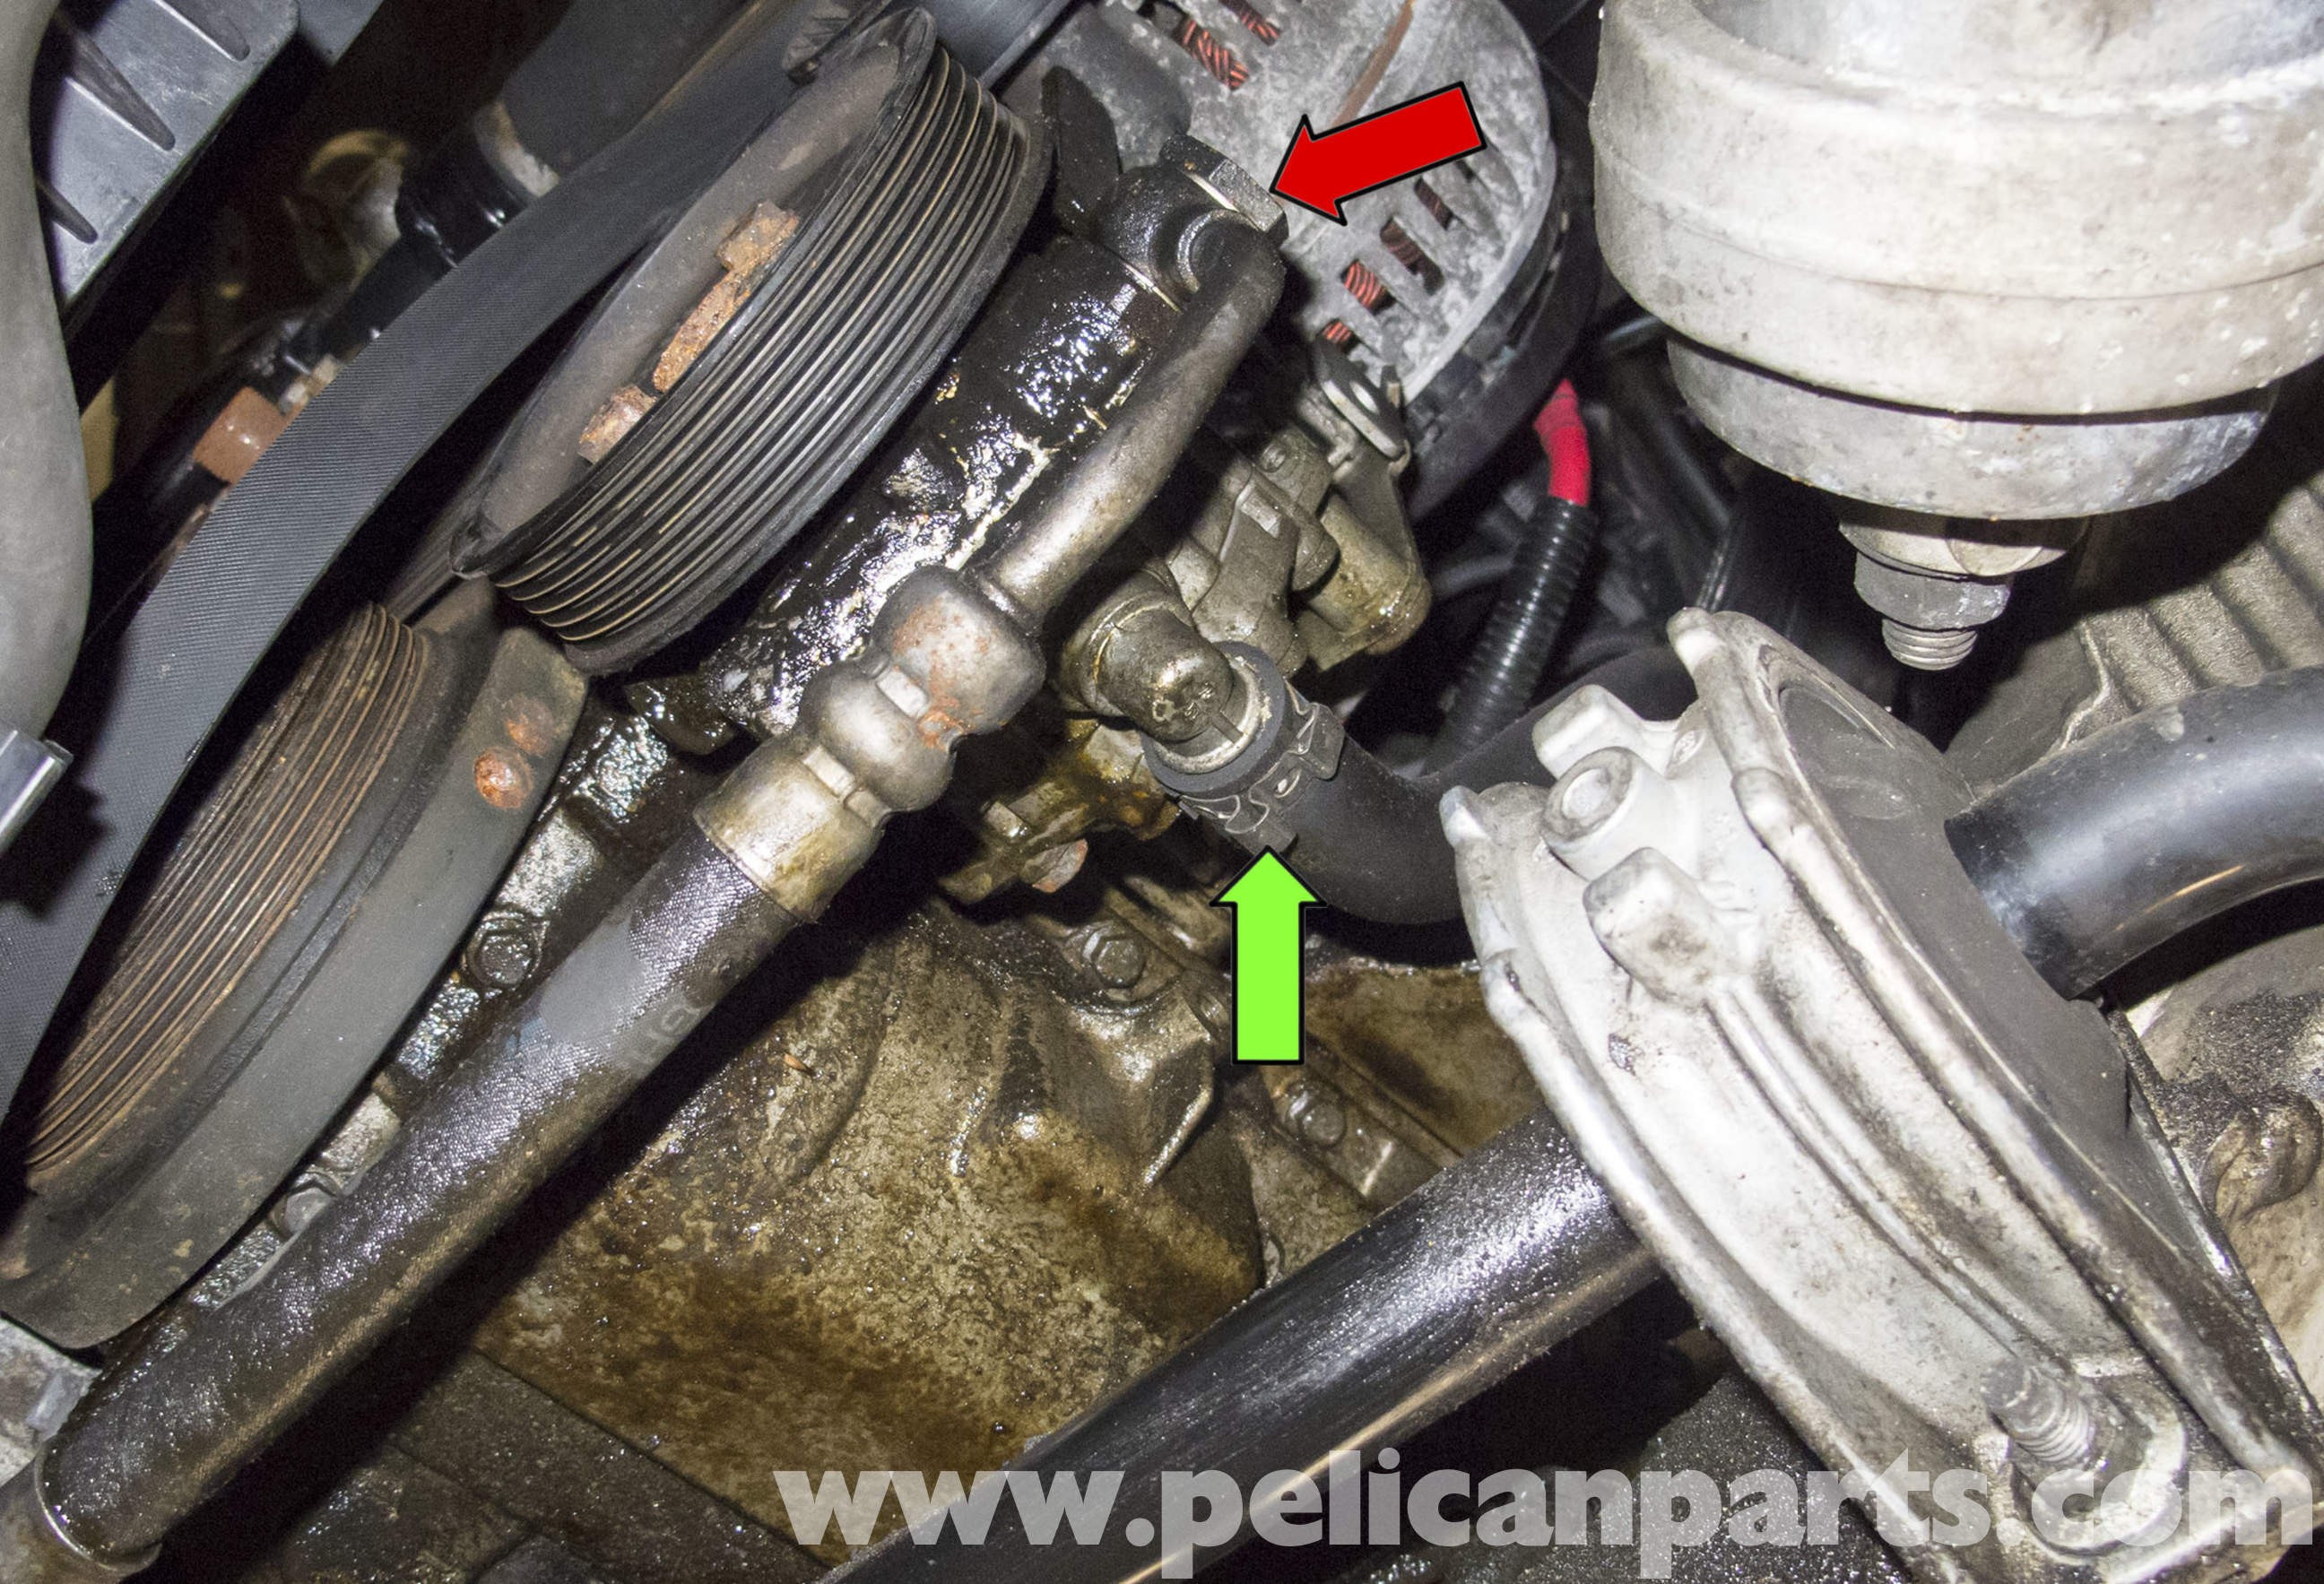 Rack and Pinion Power Steering Diagram Bmw E60 5 Series Power Steering Pump Replacement 2003 2010 Of Rack and Pinion Power Steering Diagram